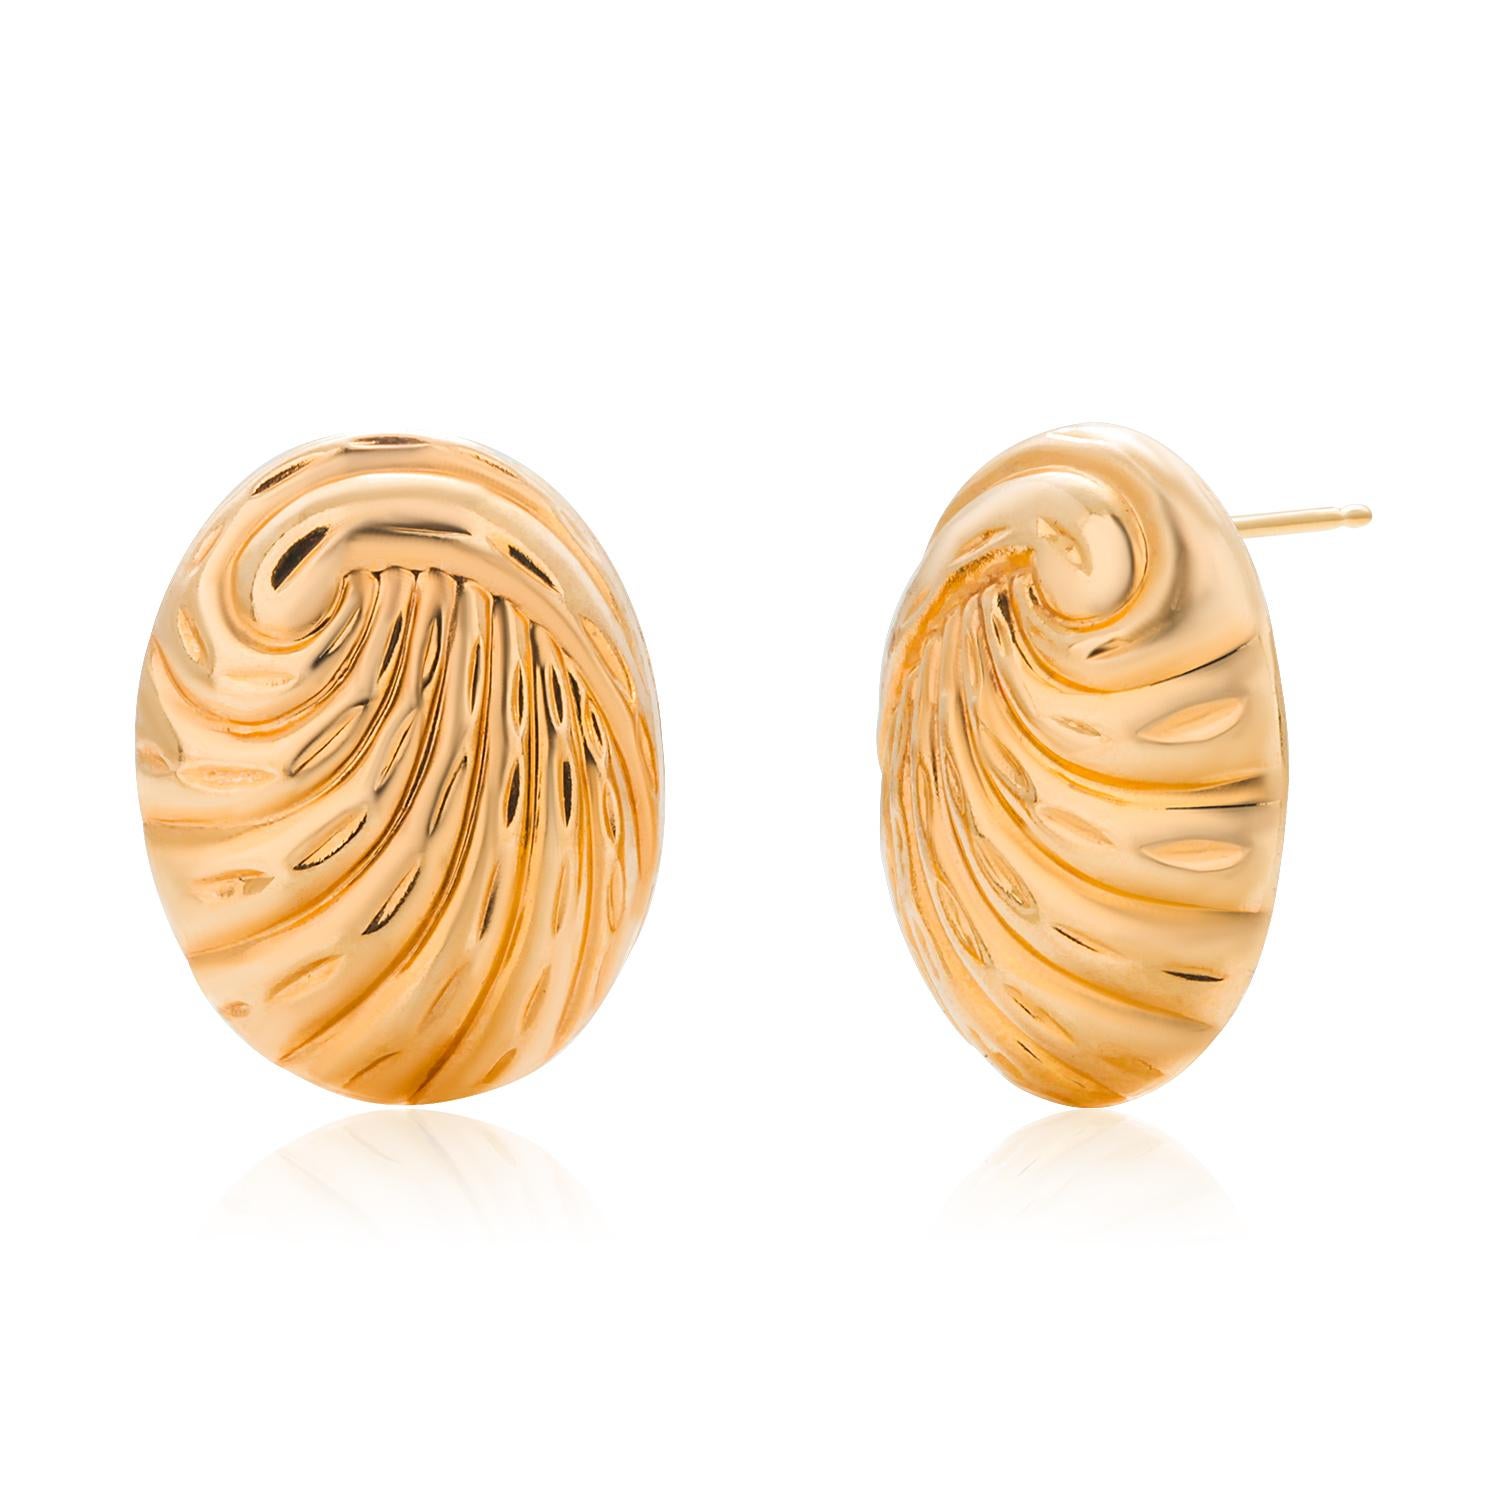 Vintage Ridged Very Thin Foil 14 Karat Yellow Gold  0.60 Inch Long Earrings For Sale 2